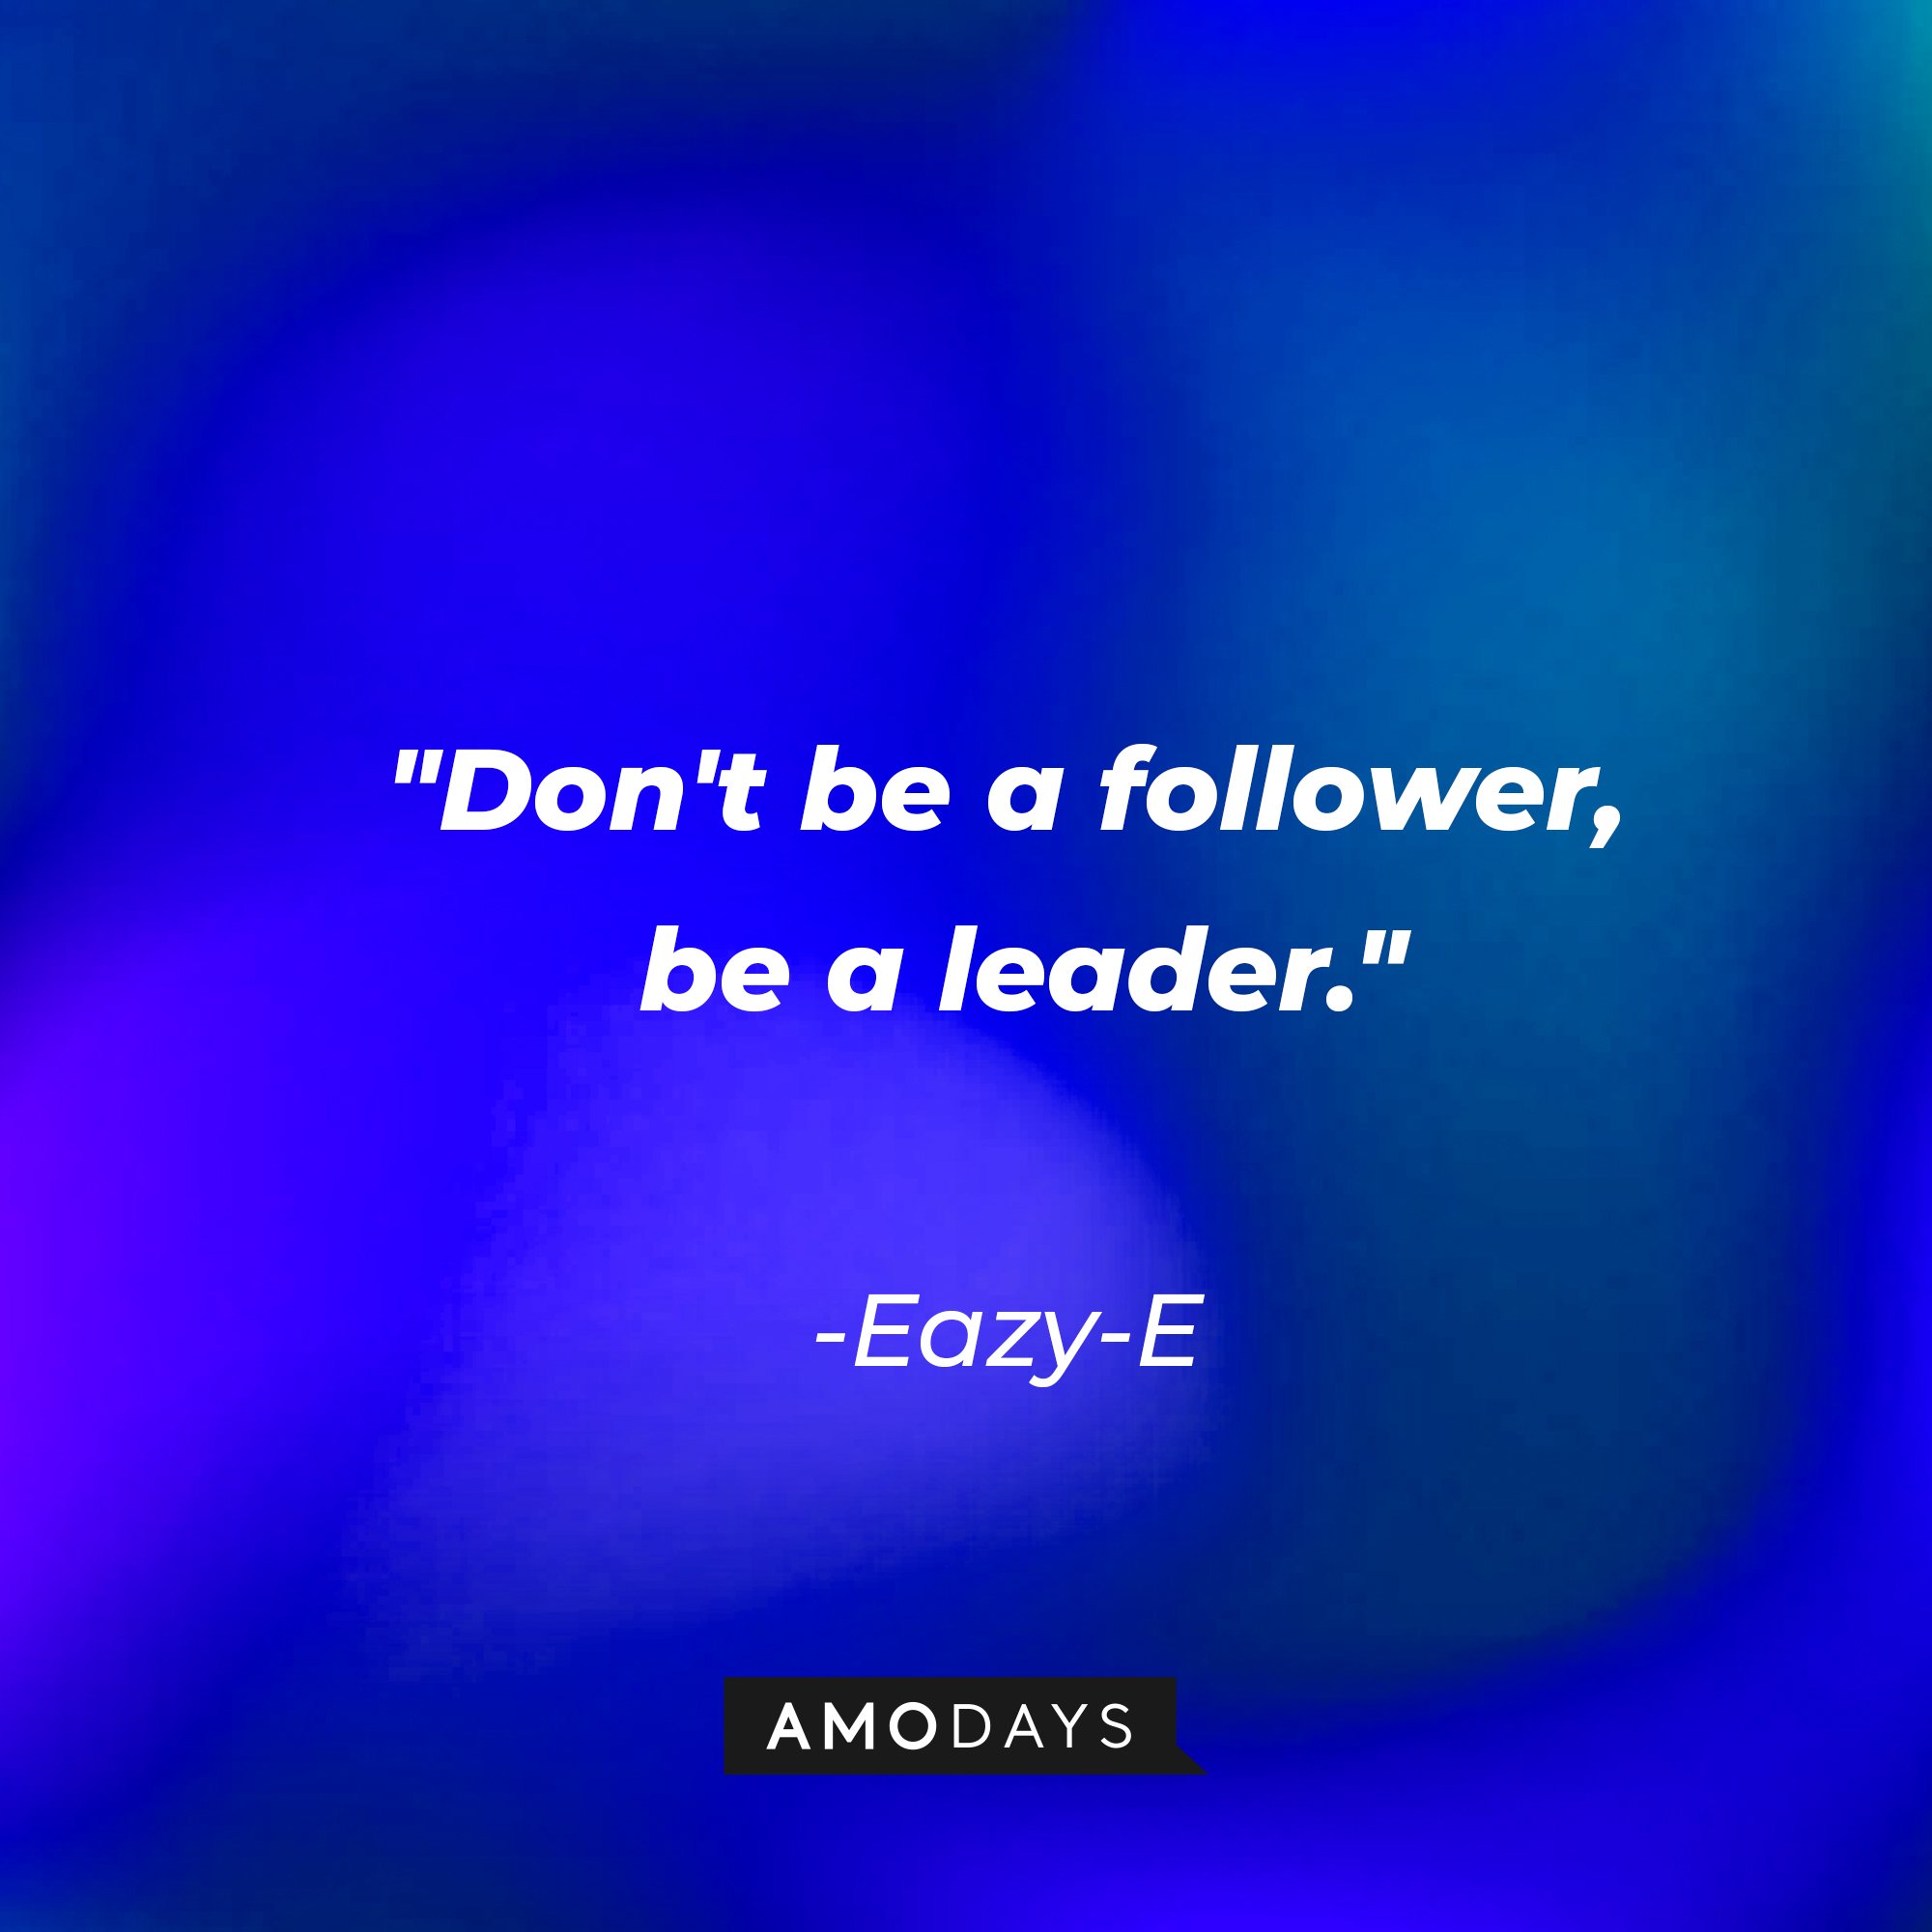 Eazy-E's quote: "Don't be a follower, be a leader." | Image: AmoDays